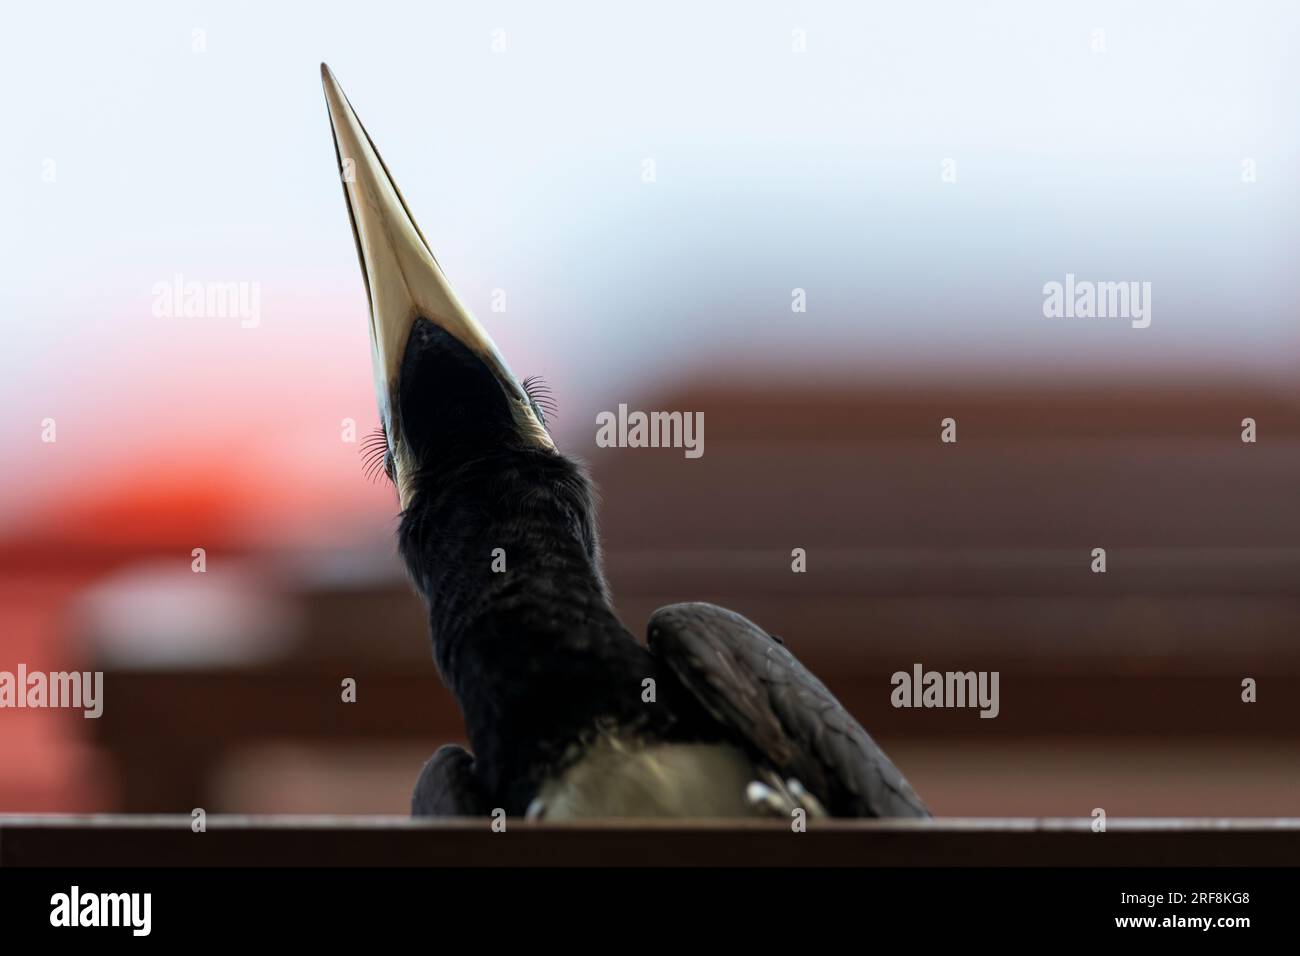 Worm's eye view of an adult male Oriental Pied Hornbill perches on a ledge of an external wall in a public housing estate, Singapore Stock Photo